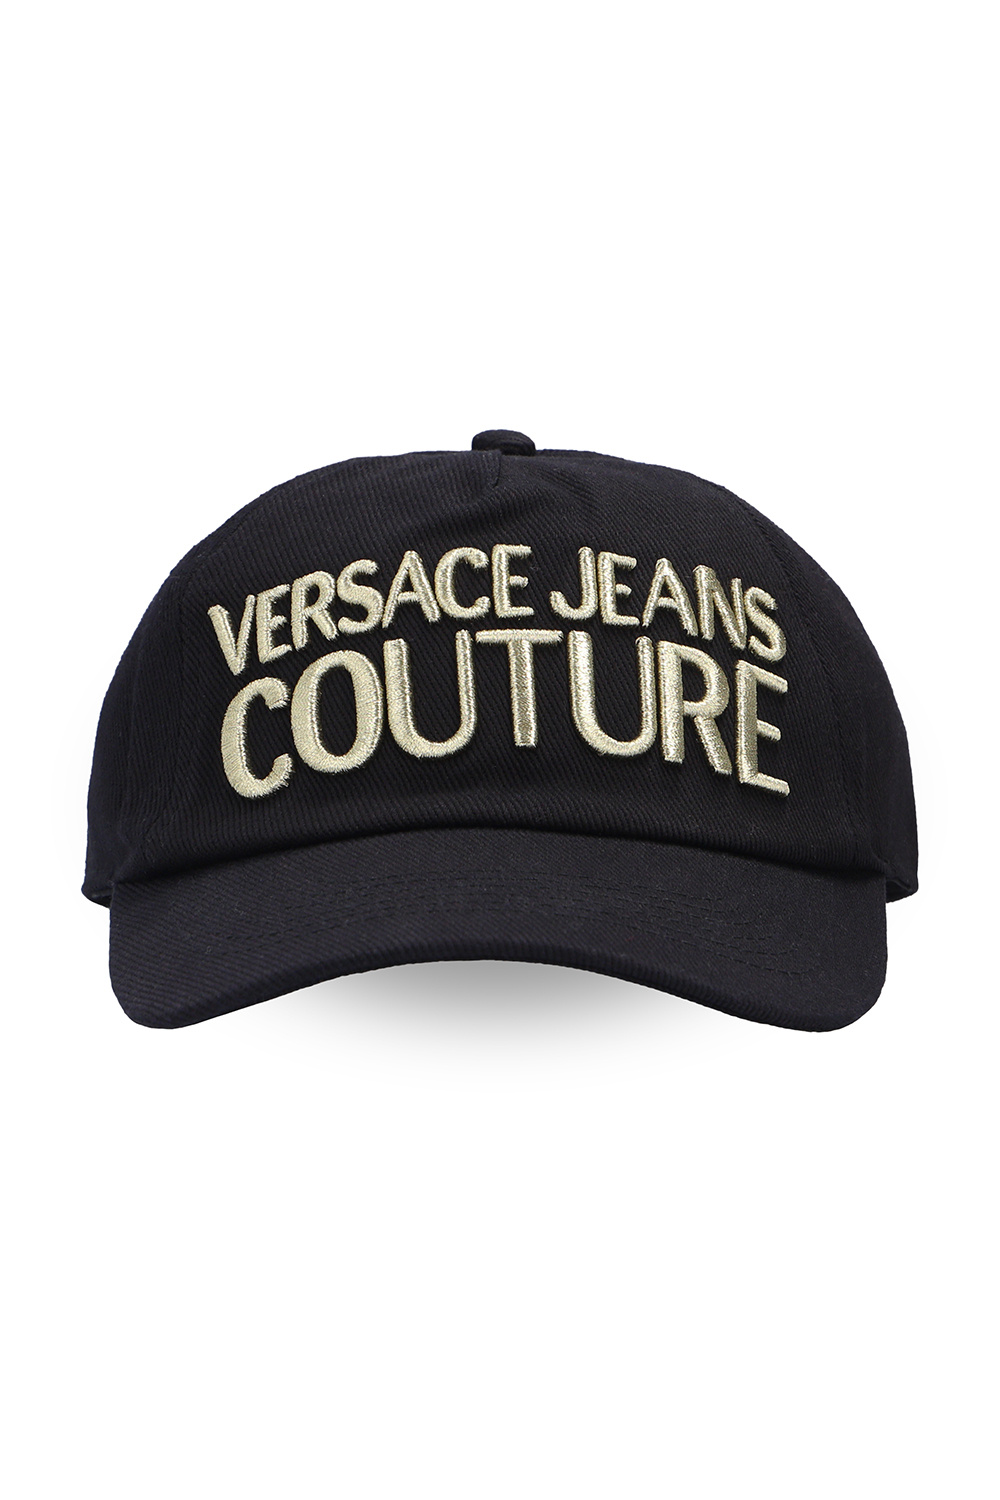 Versace Jeans Couture caps usb women robes 42